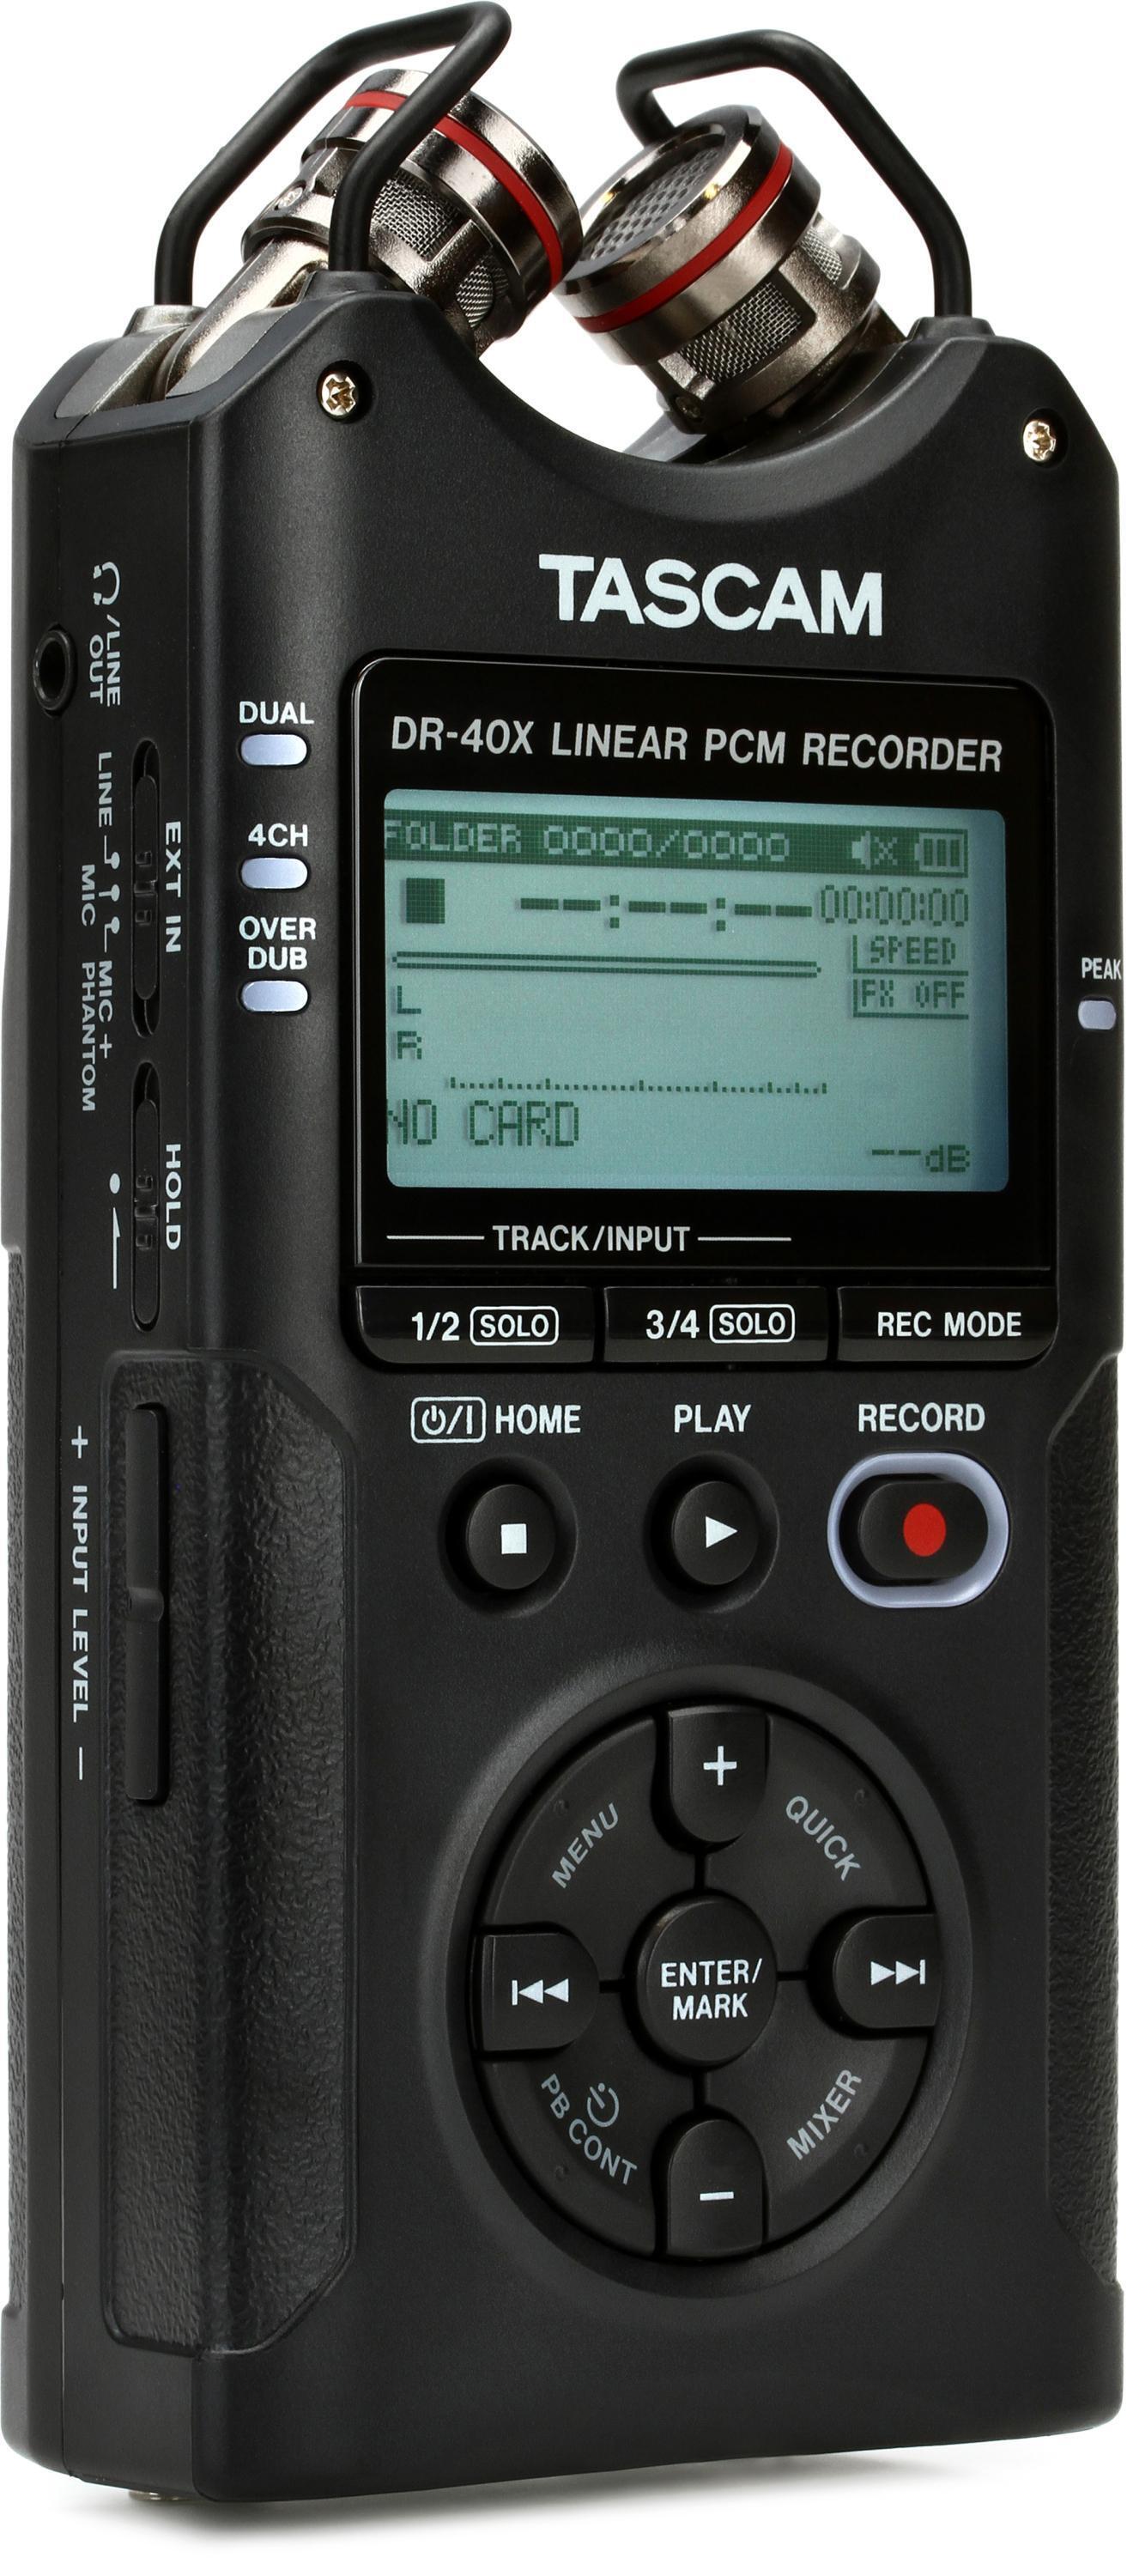 TASCAM DR-40X 4-channel Handheld Recorder | Sweetwater